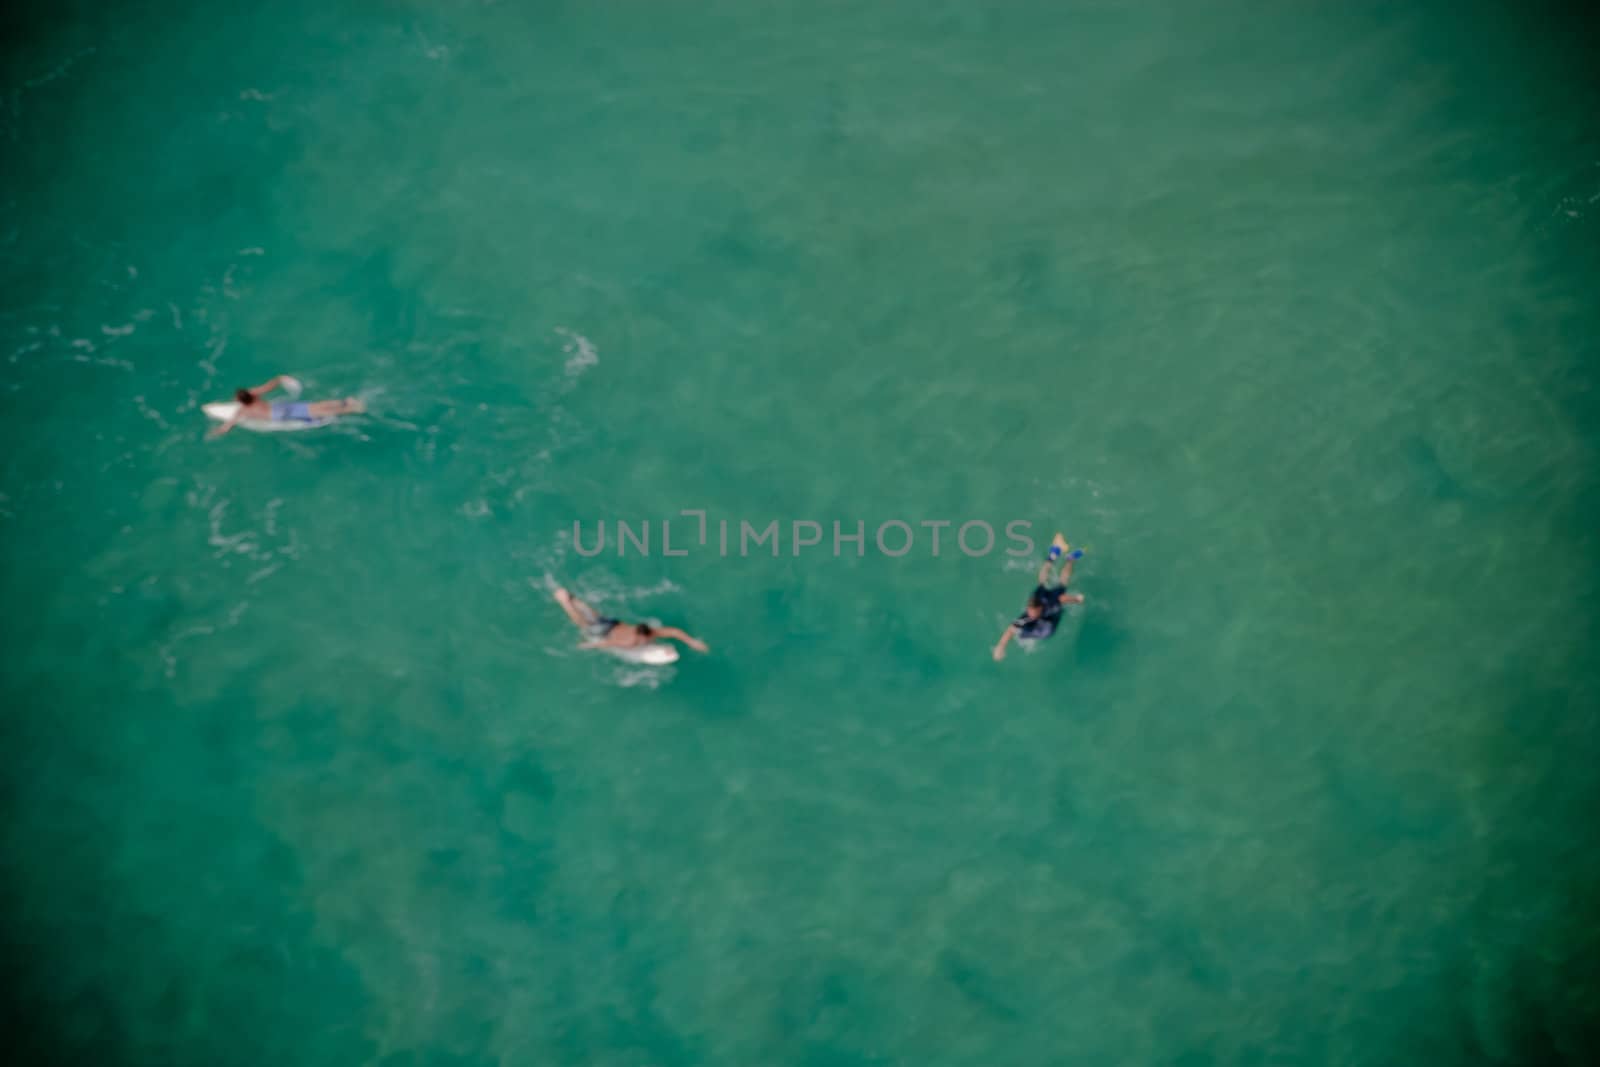 Surfers paddling in the ocean by jrstock